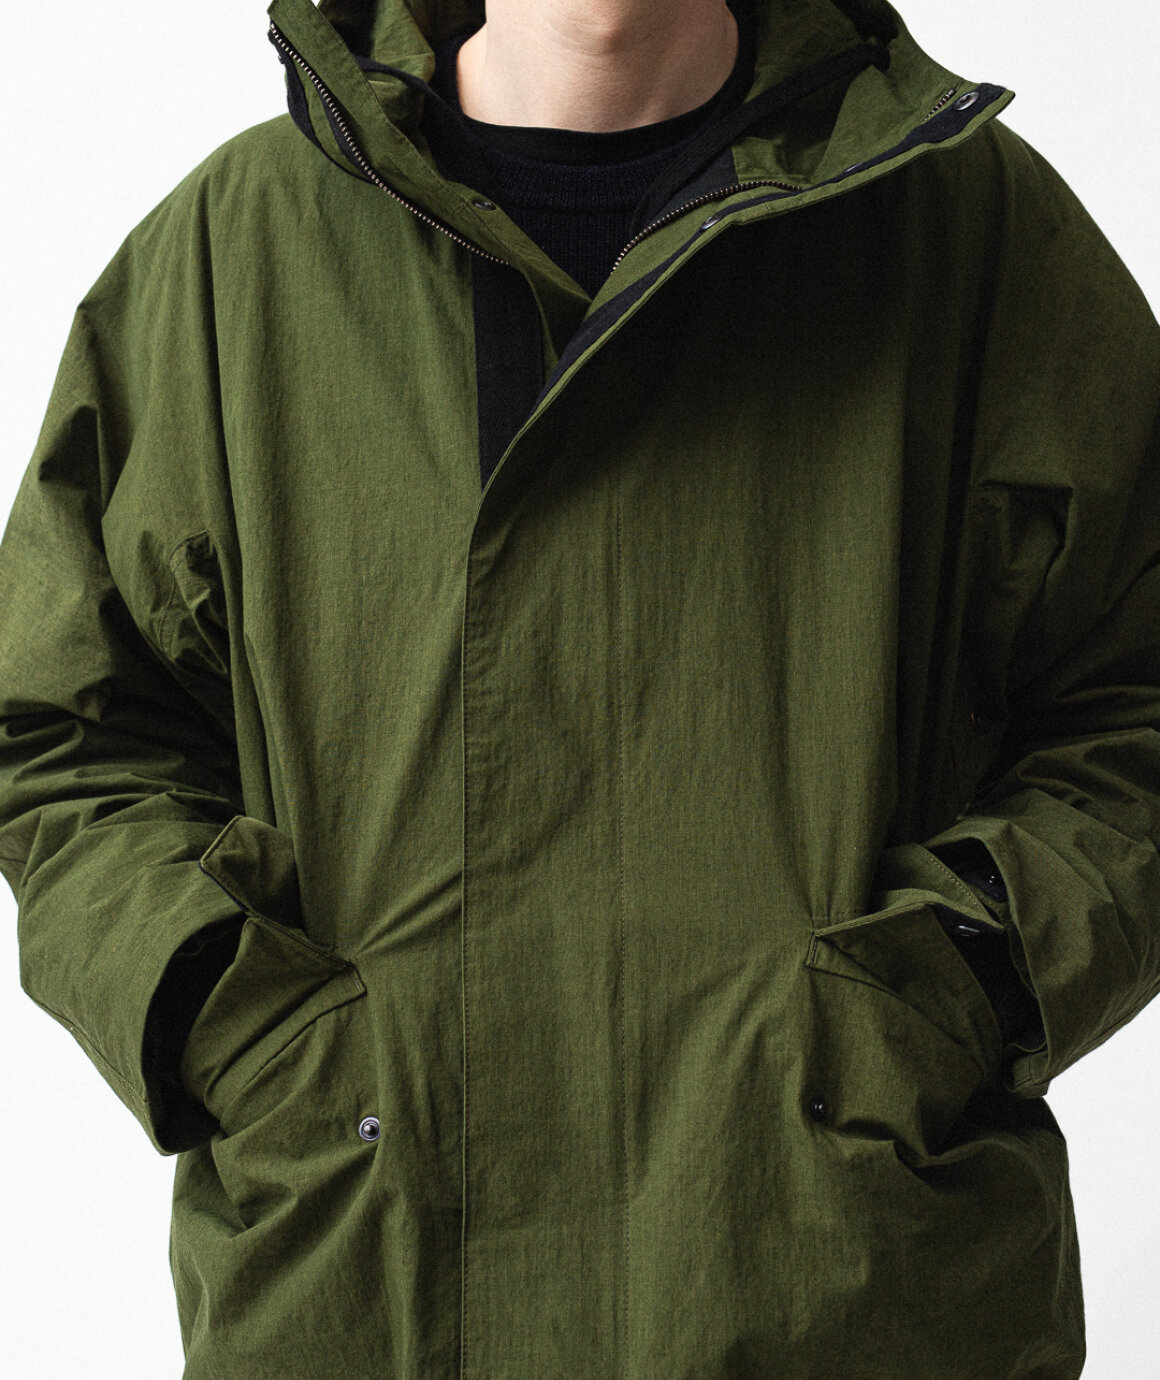 Norse Store | Shipping Worldwide - Margaret Howell MHL DECK COAT - Green